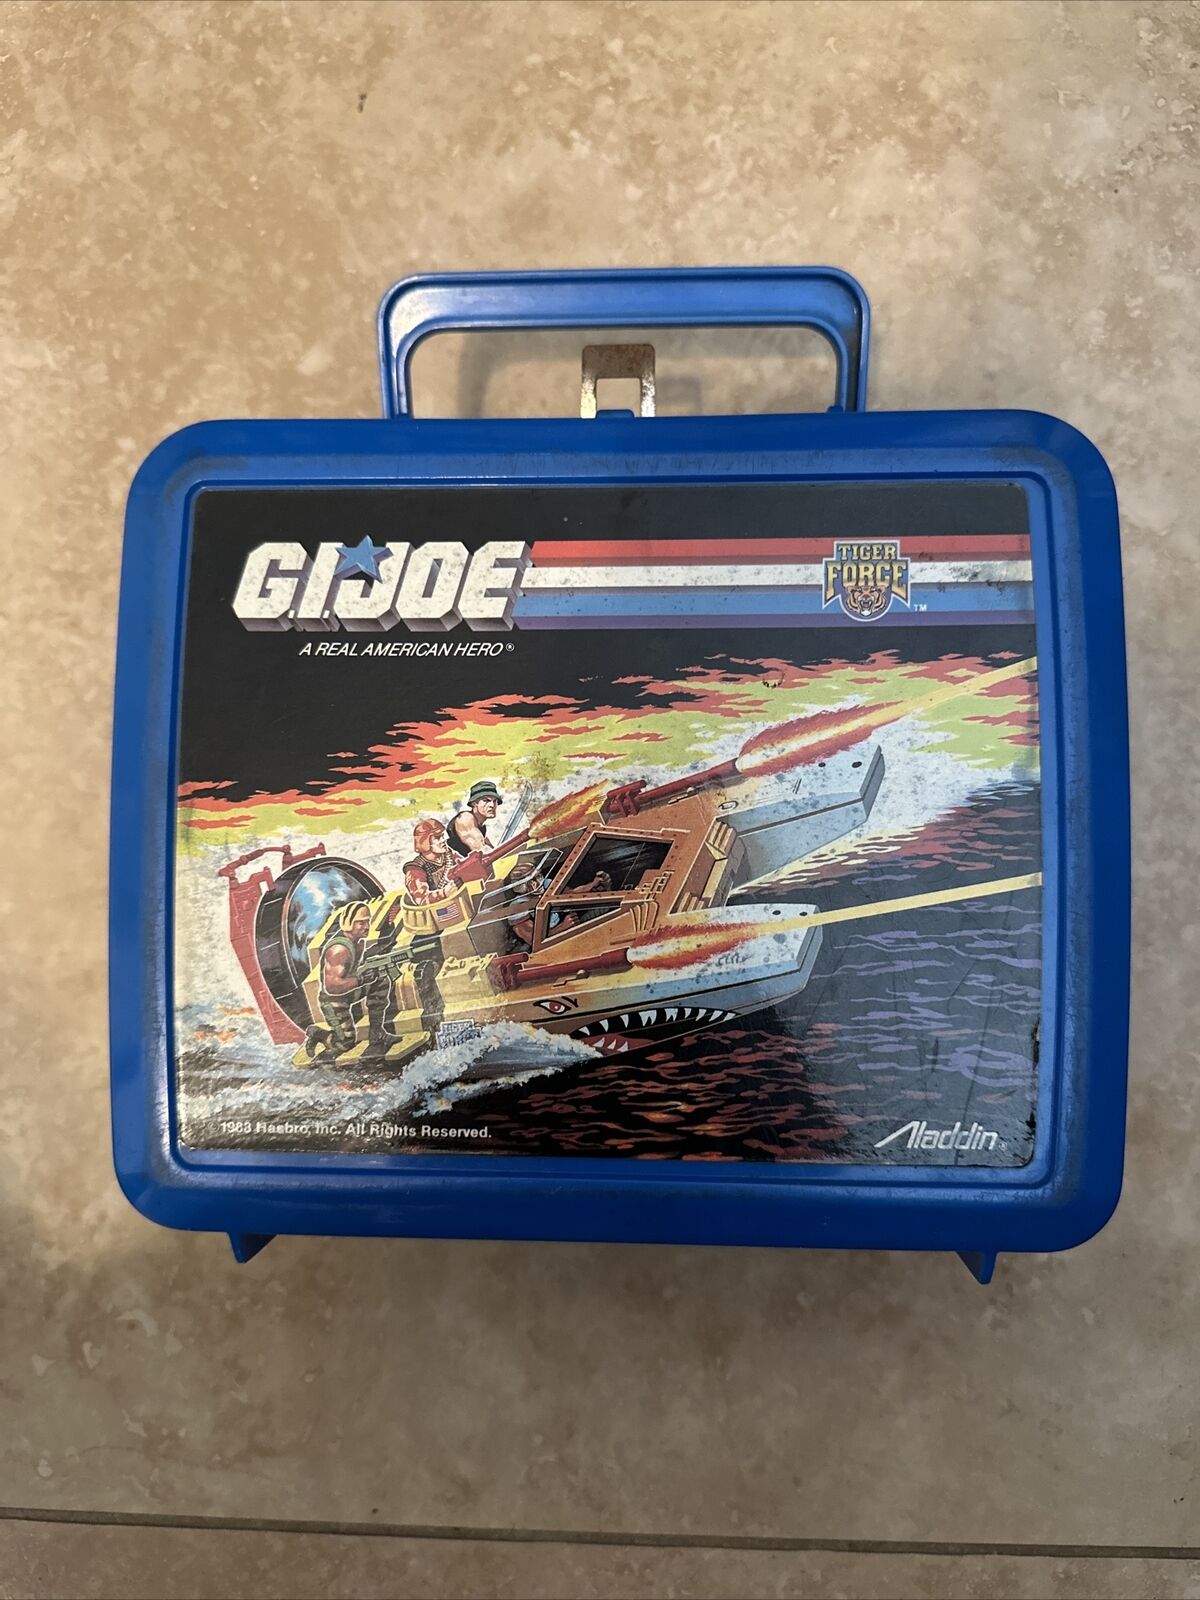 Vintage 1988 Hasbro G.I. Joe Tiger Force Lunchbox with Thermos by Alladin